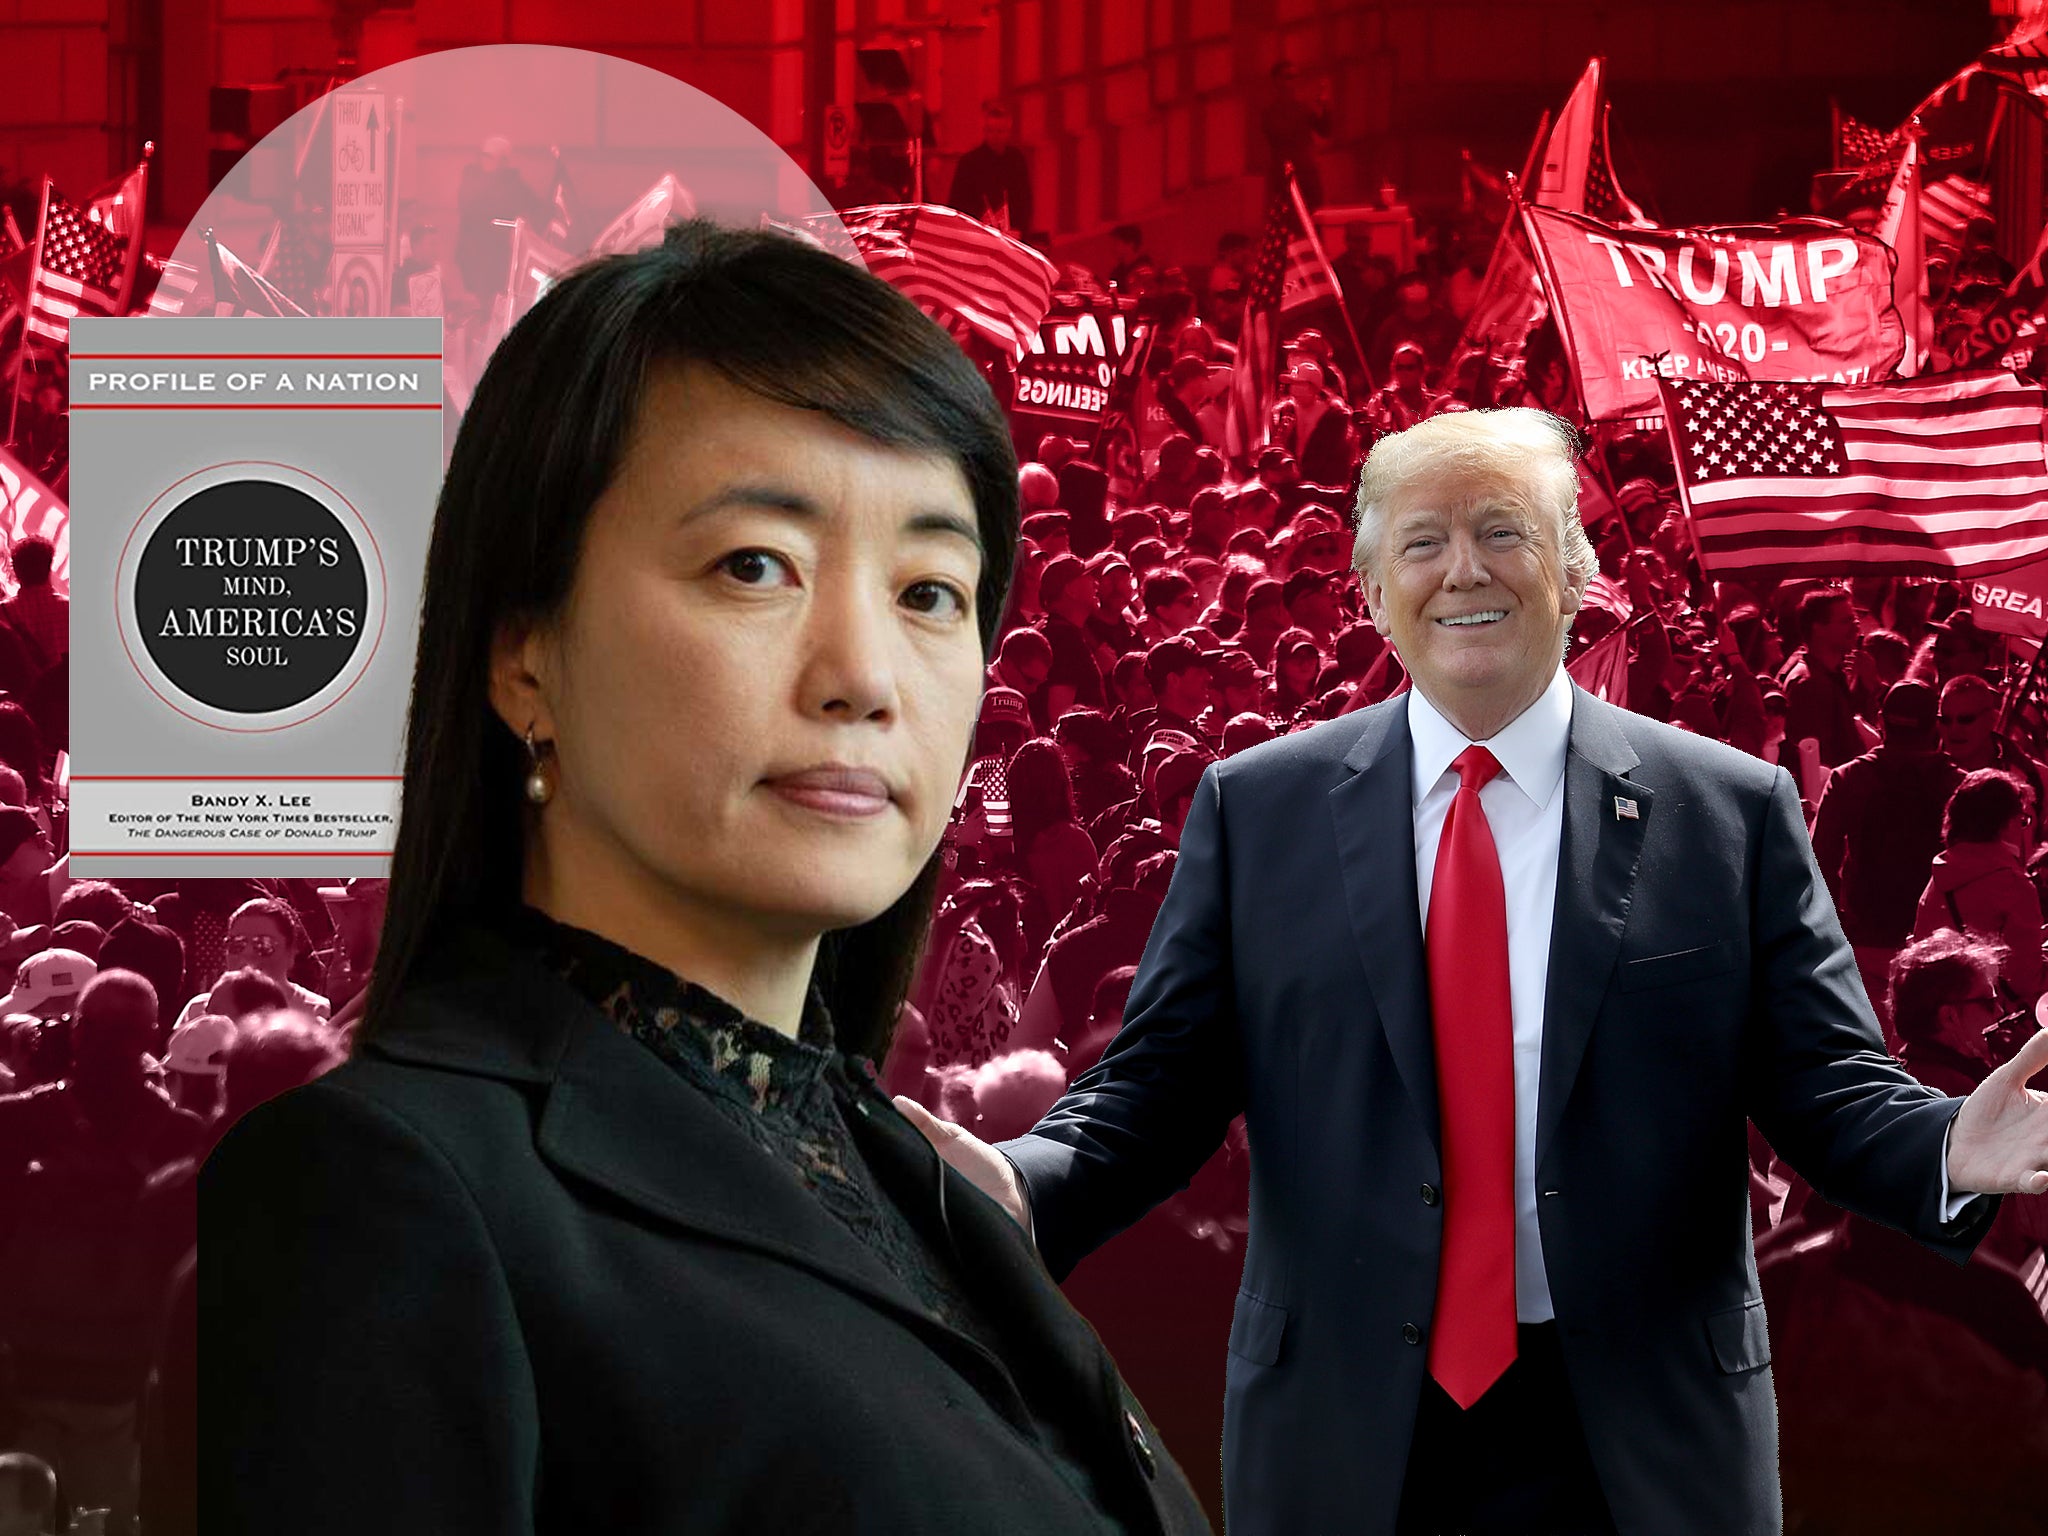 Dr Bandy Lee published The Dangerous Case of Donald Trump in 2017